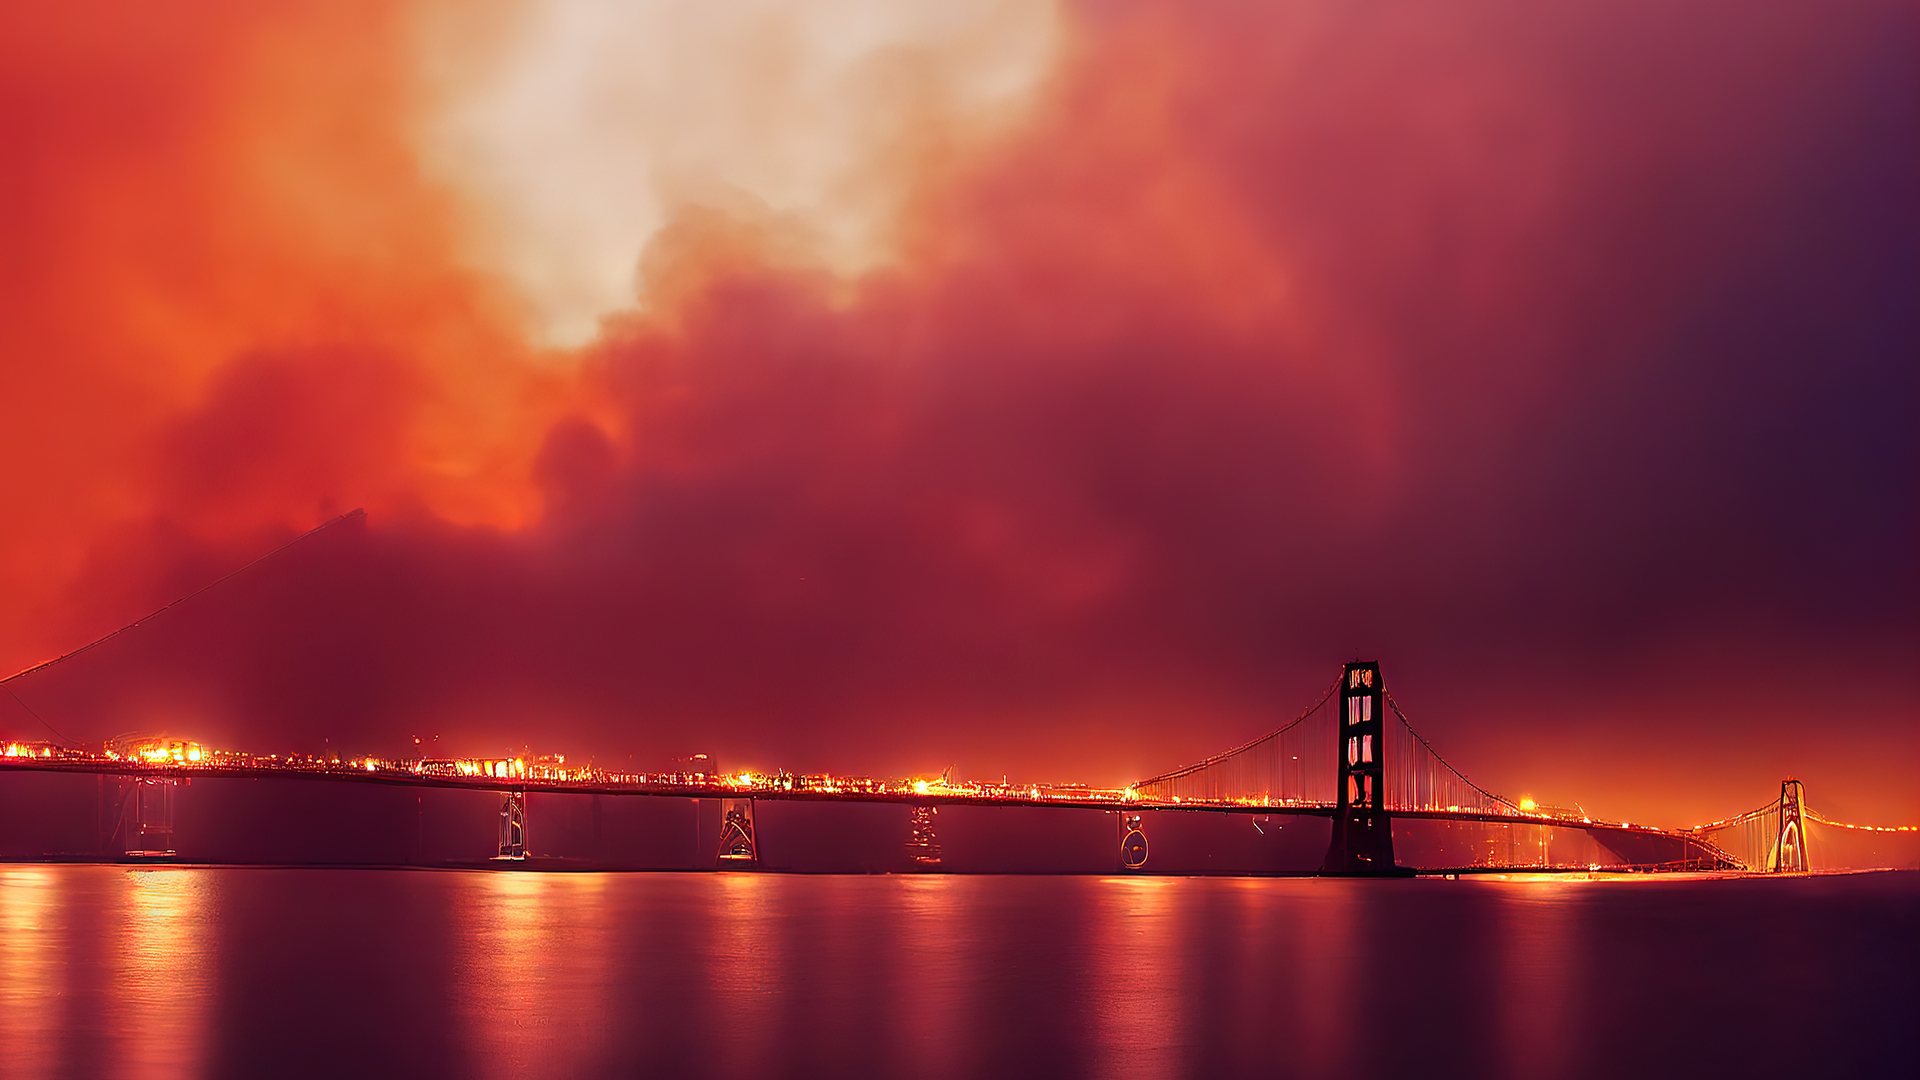 wildfire in California, evacuation and damage to structures